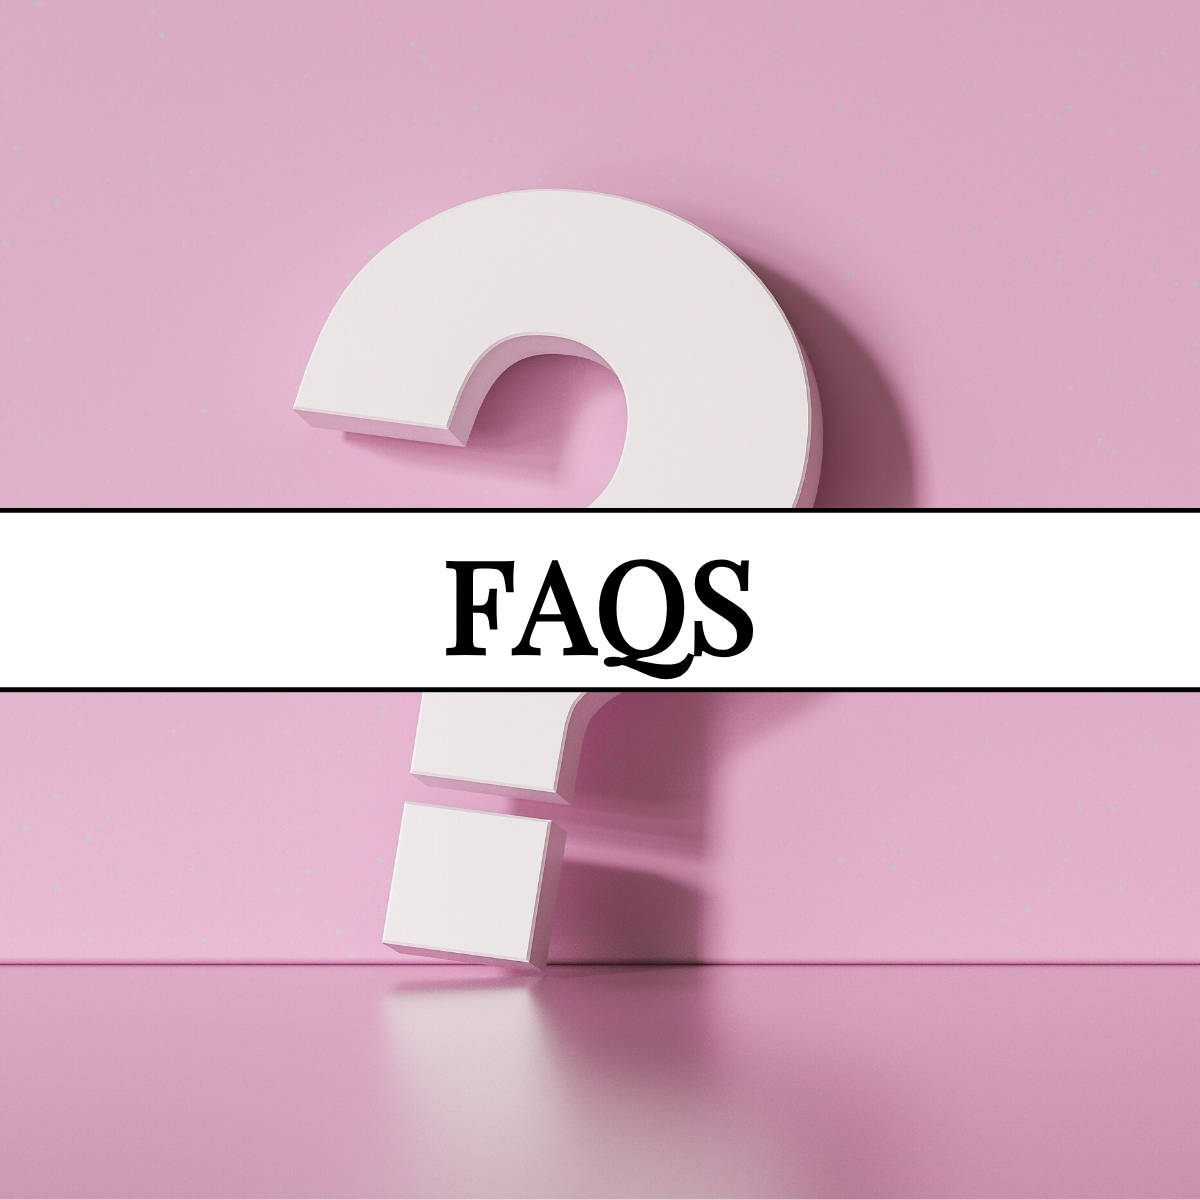 Pink background with question mark and text overlay that says FAQs.